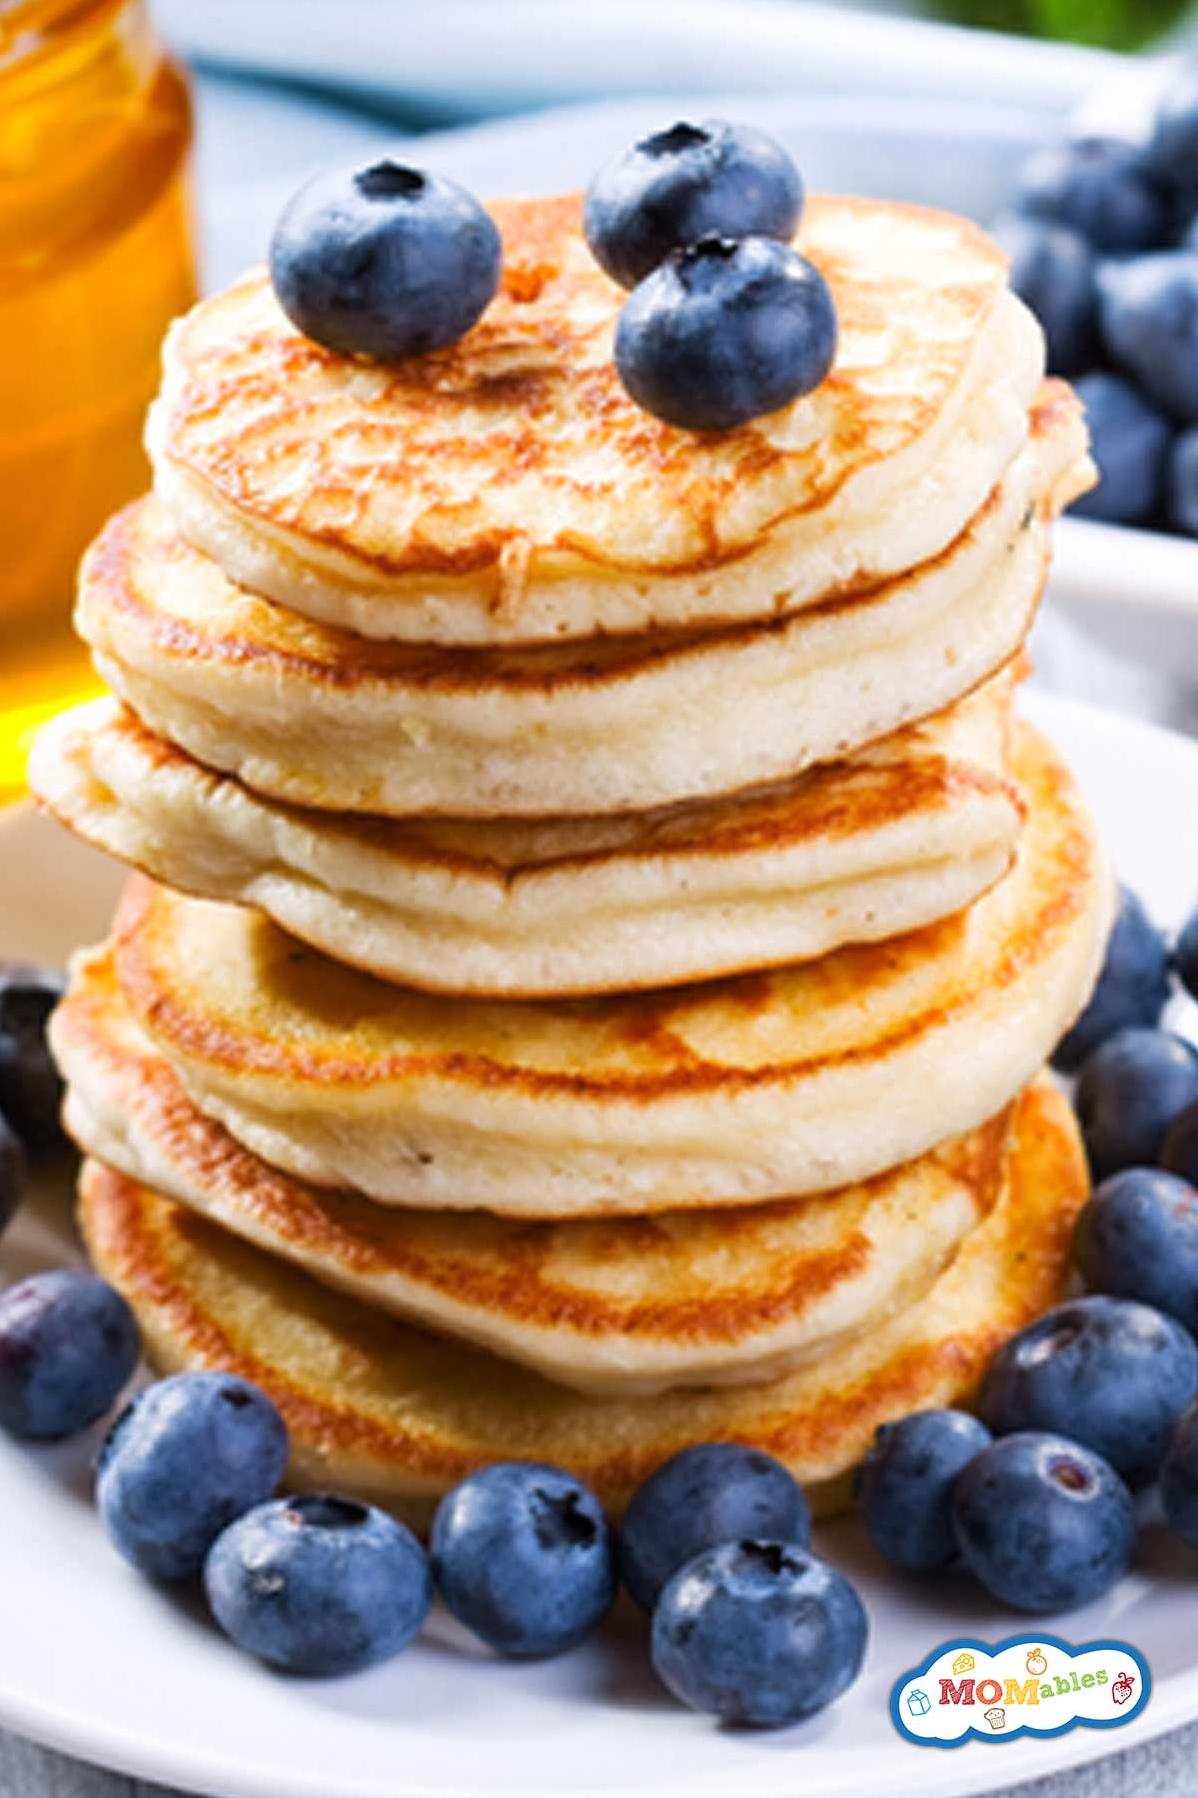  A stack of golden gluten-free, dairy-free, and egg-free pancakes to start off your day!